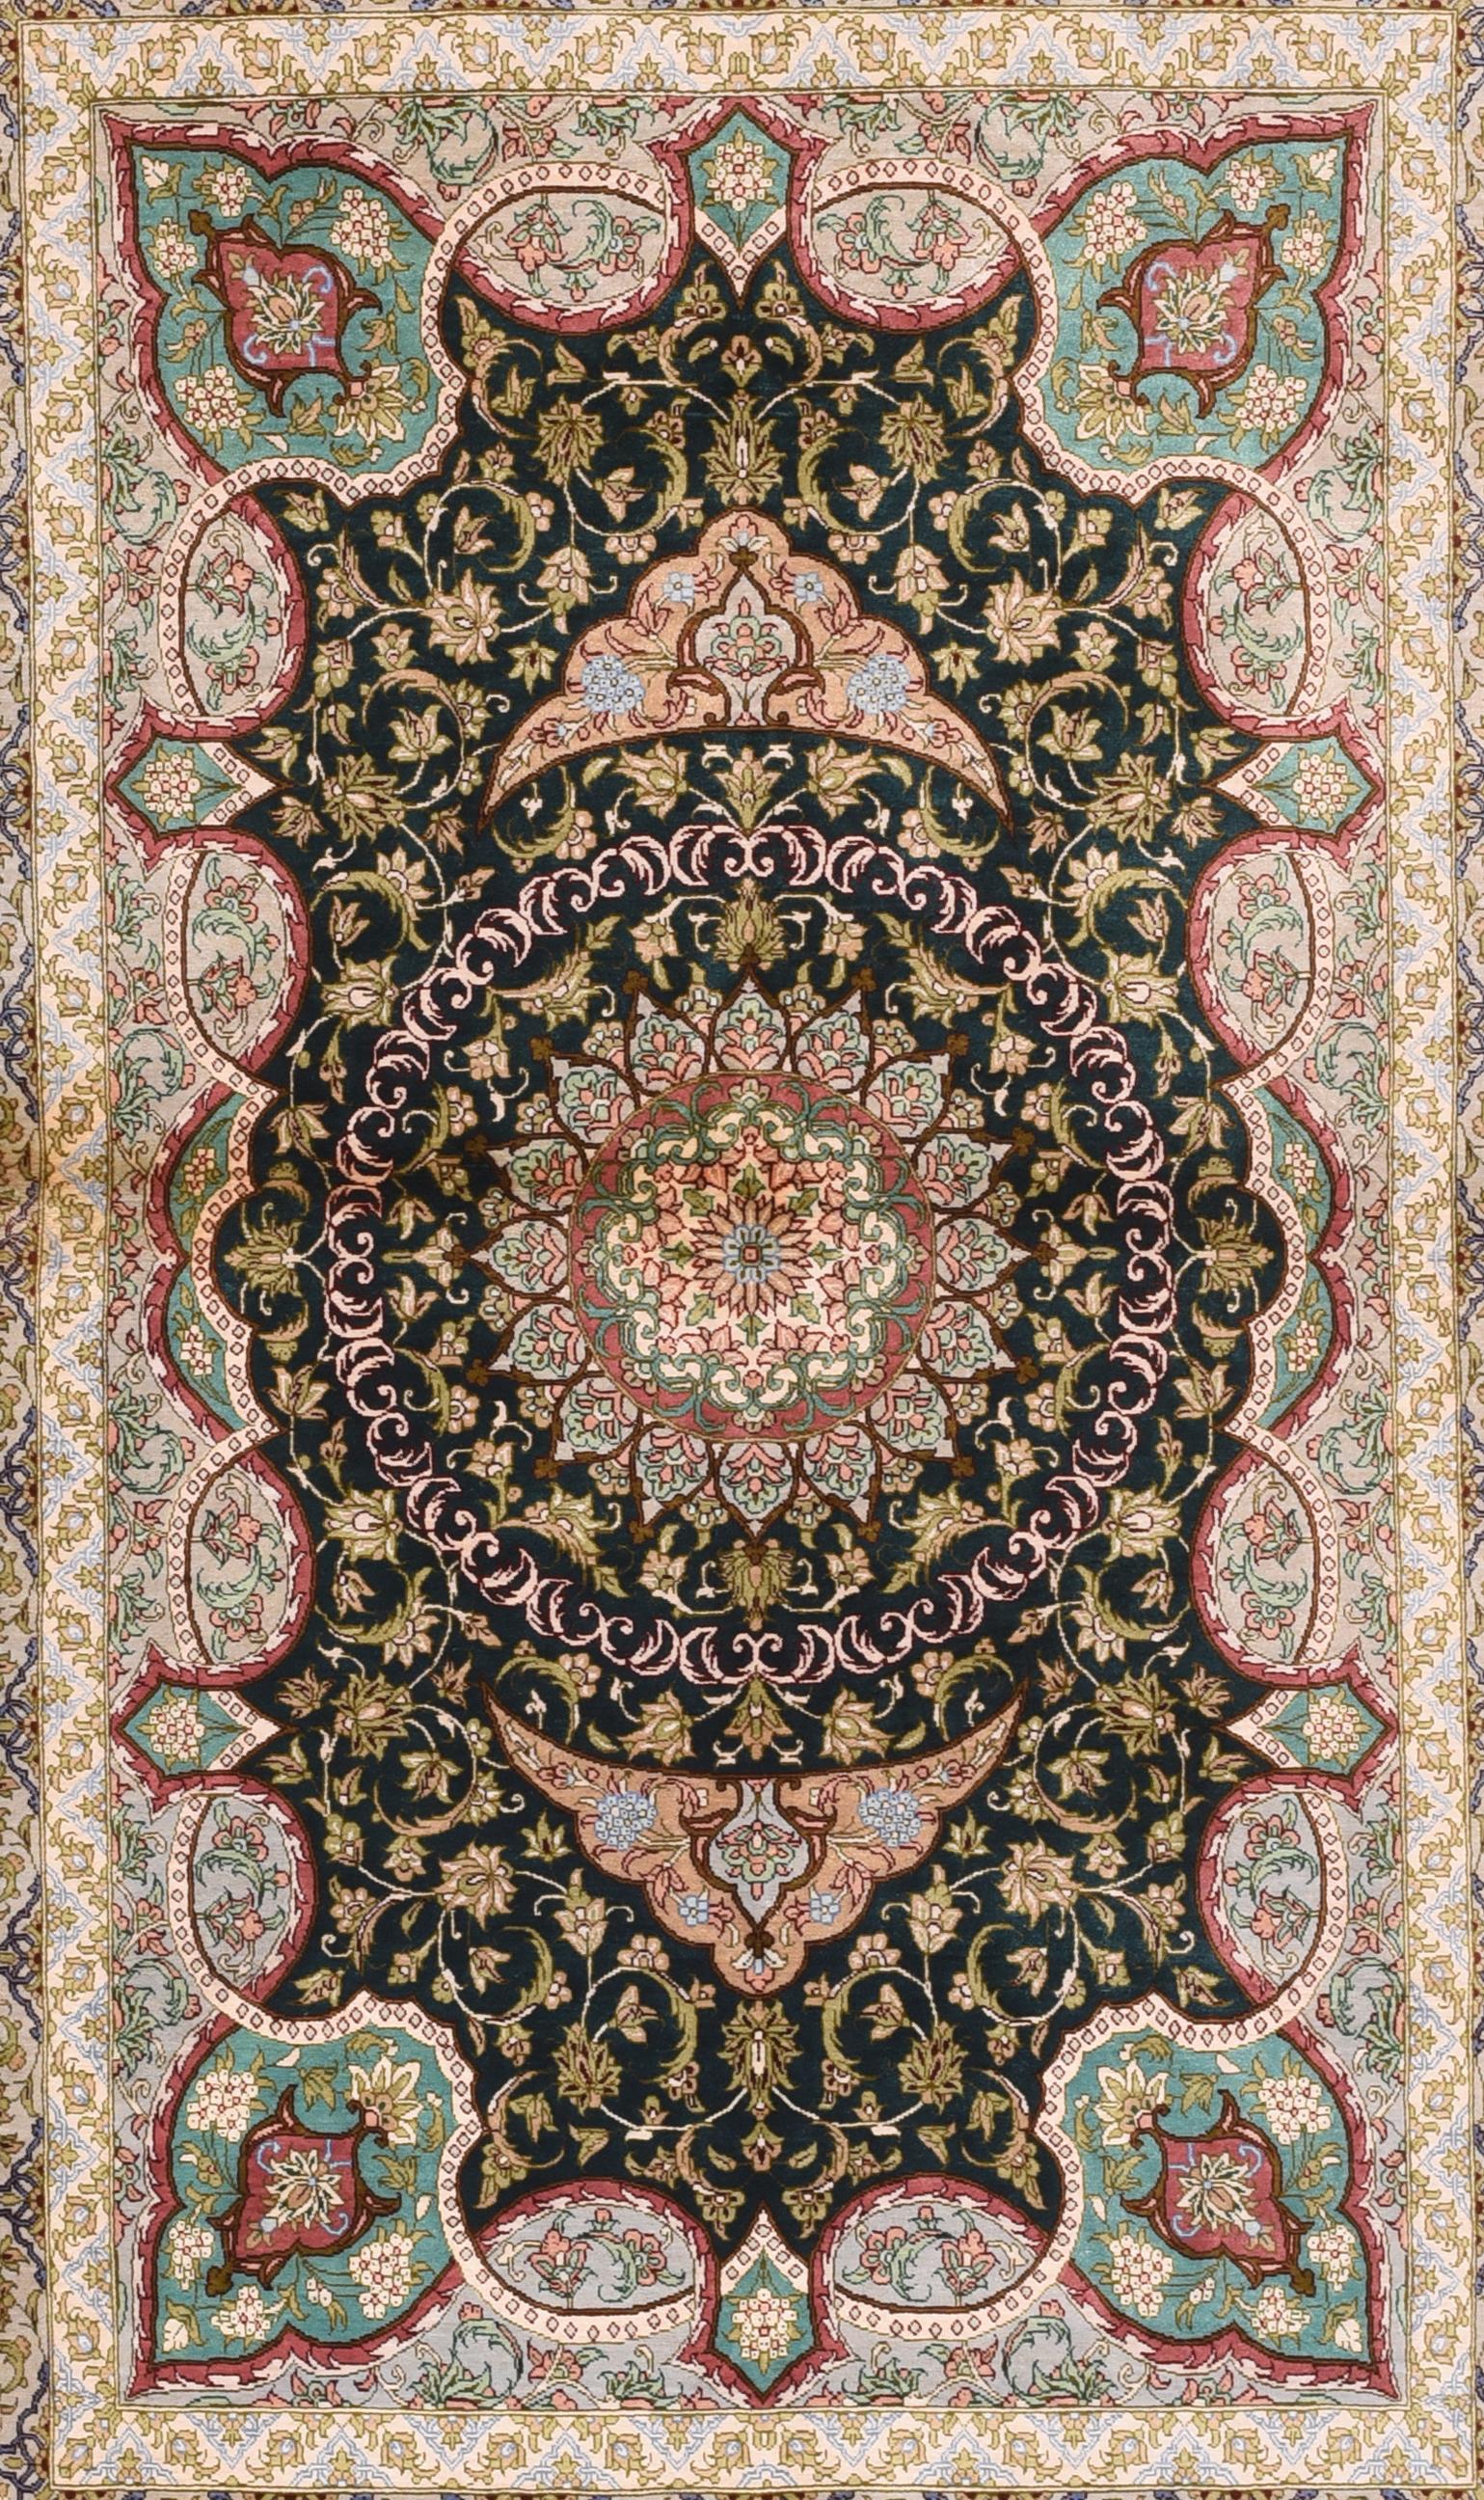 Qom rugs (or Qum, Ghom, Ghum) are made in the Qom Province of Iran, around 100 km south of Tehran. Although rug weaving in Qom was not a major industry until the past 100 years, the luxurious silk and wool rugs of Qom are known for their high